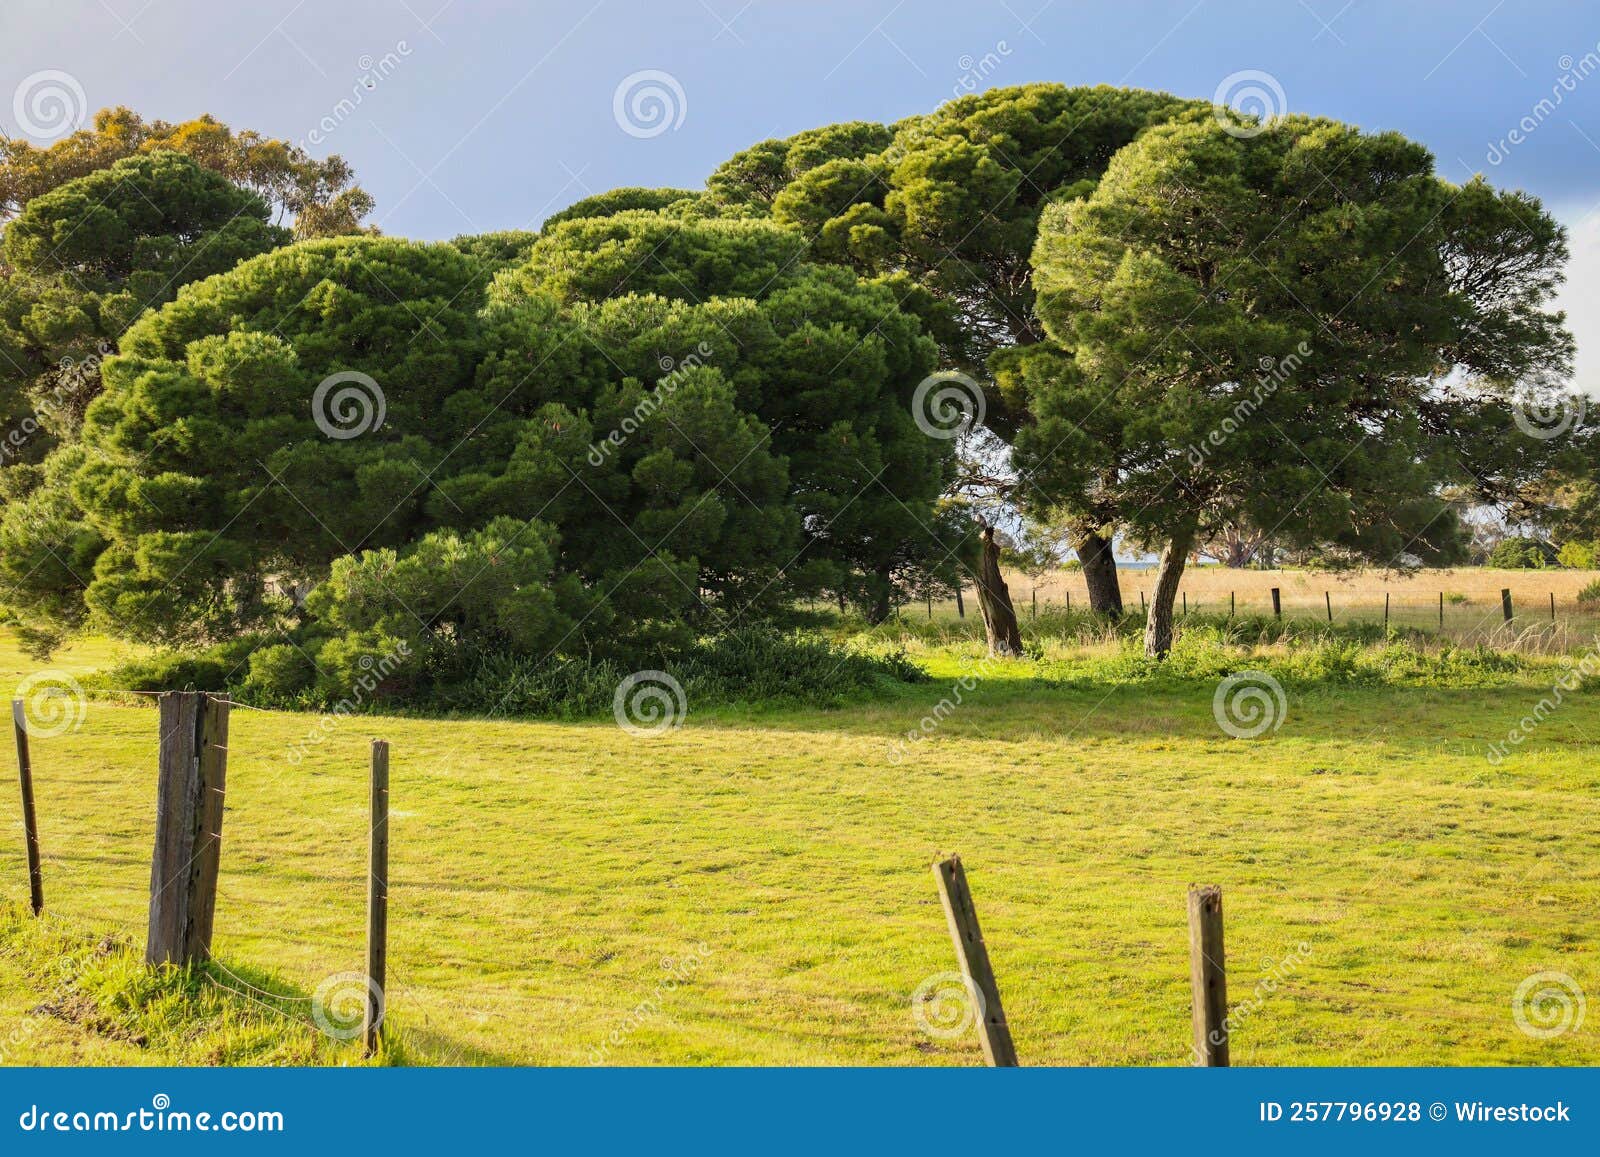 Aerial View Of Greenery Field Surrounded By Dense Trees Stock Photo